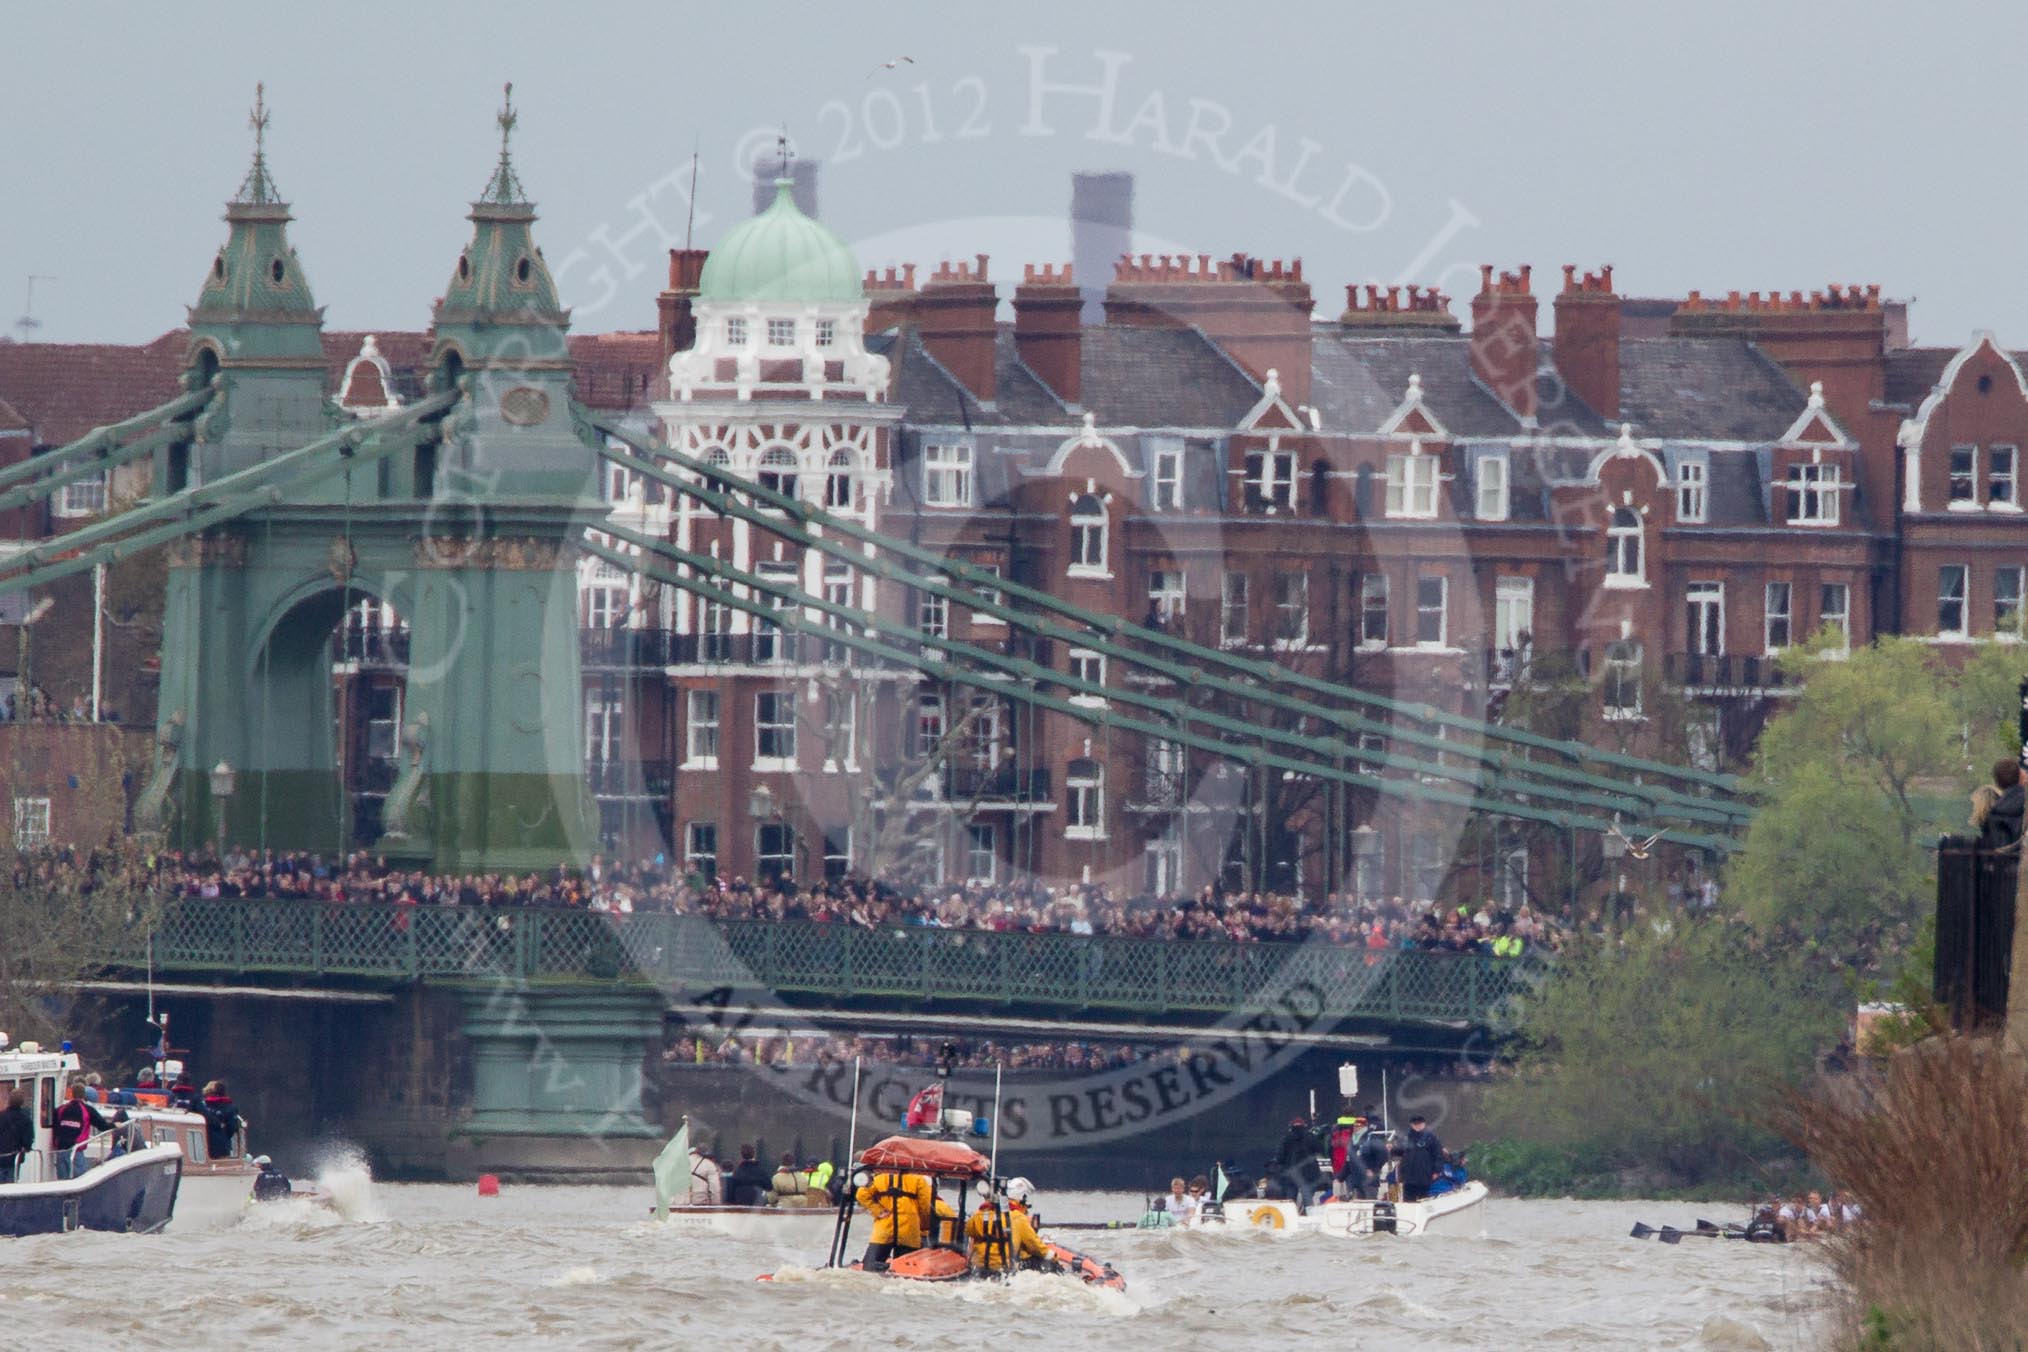 The Boat Race 2012: The 2012 Boat Race, with the boats approaching Hammersmith Bridge: The Cambridge Blue Boat on the left, nearly covered by the boat of the umpire, and the Oxford Blue Boat on the right..




on 07 April 2012 at 14:20, image #303